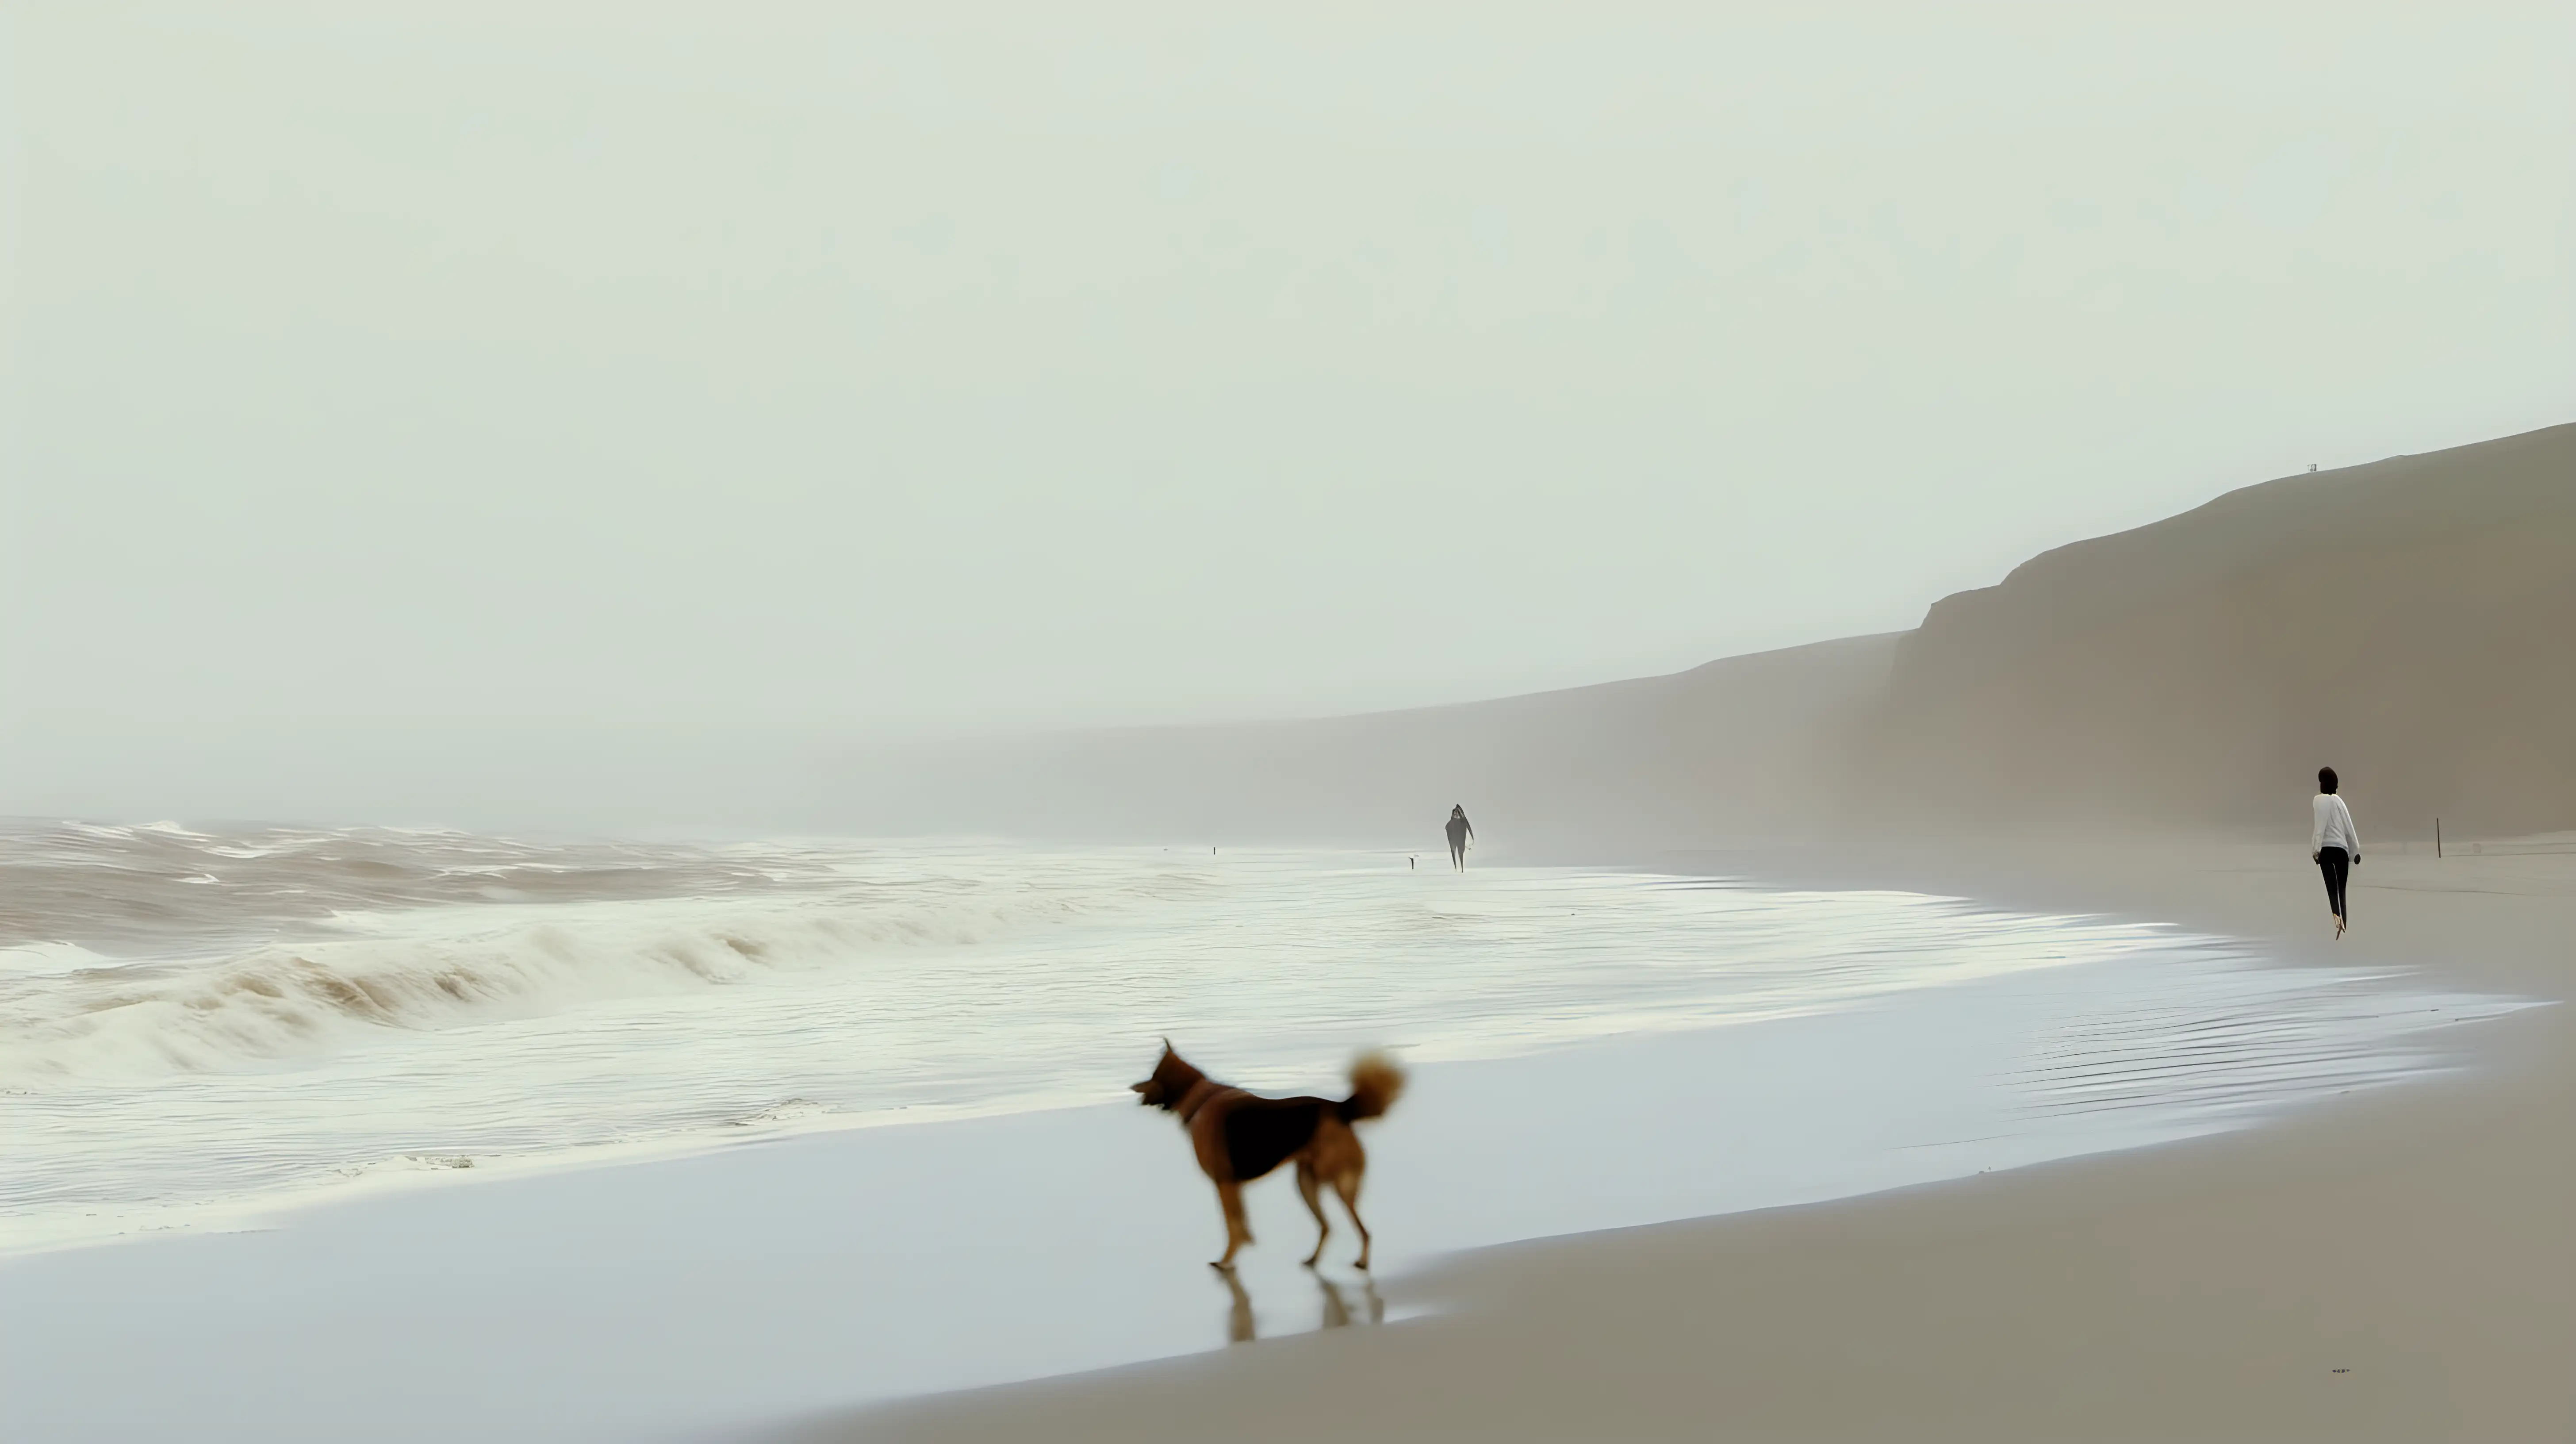 Serene Solitude Individual and Canine Companion by the Vast Shoreline